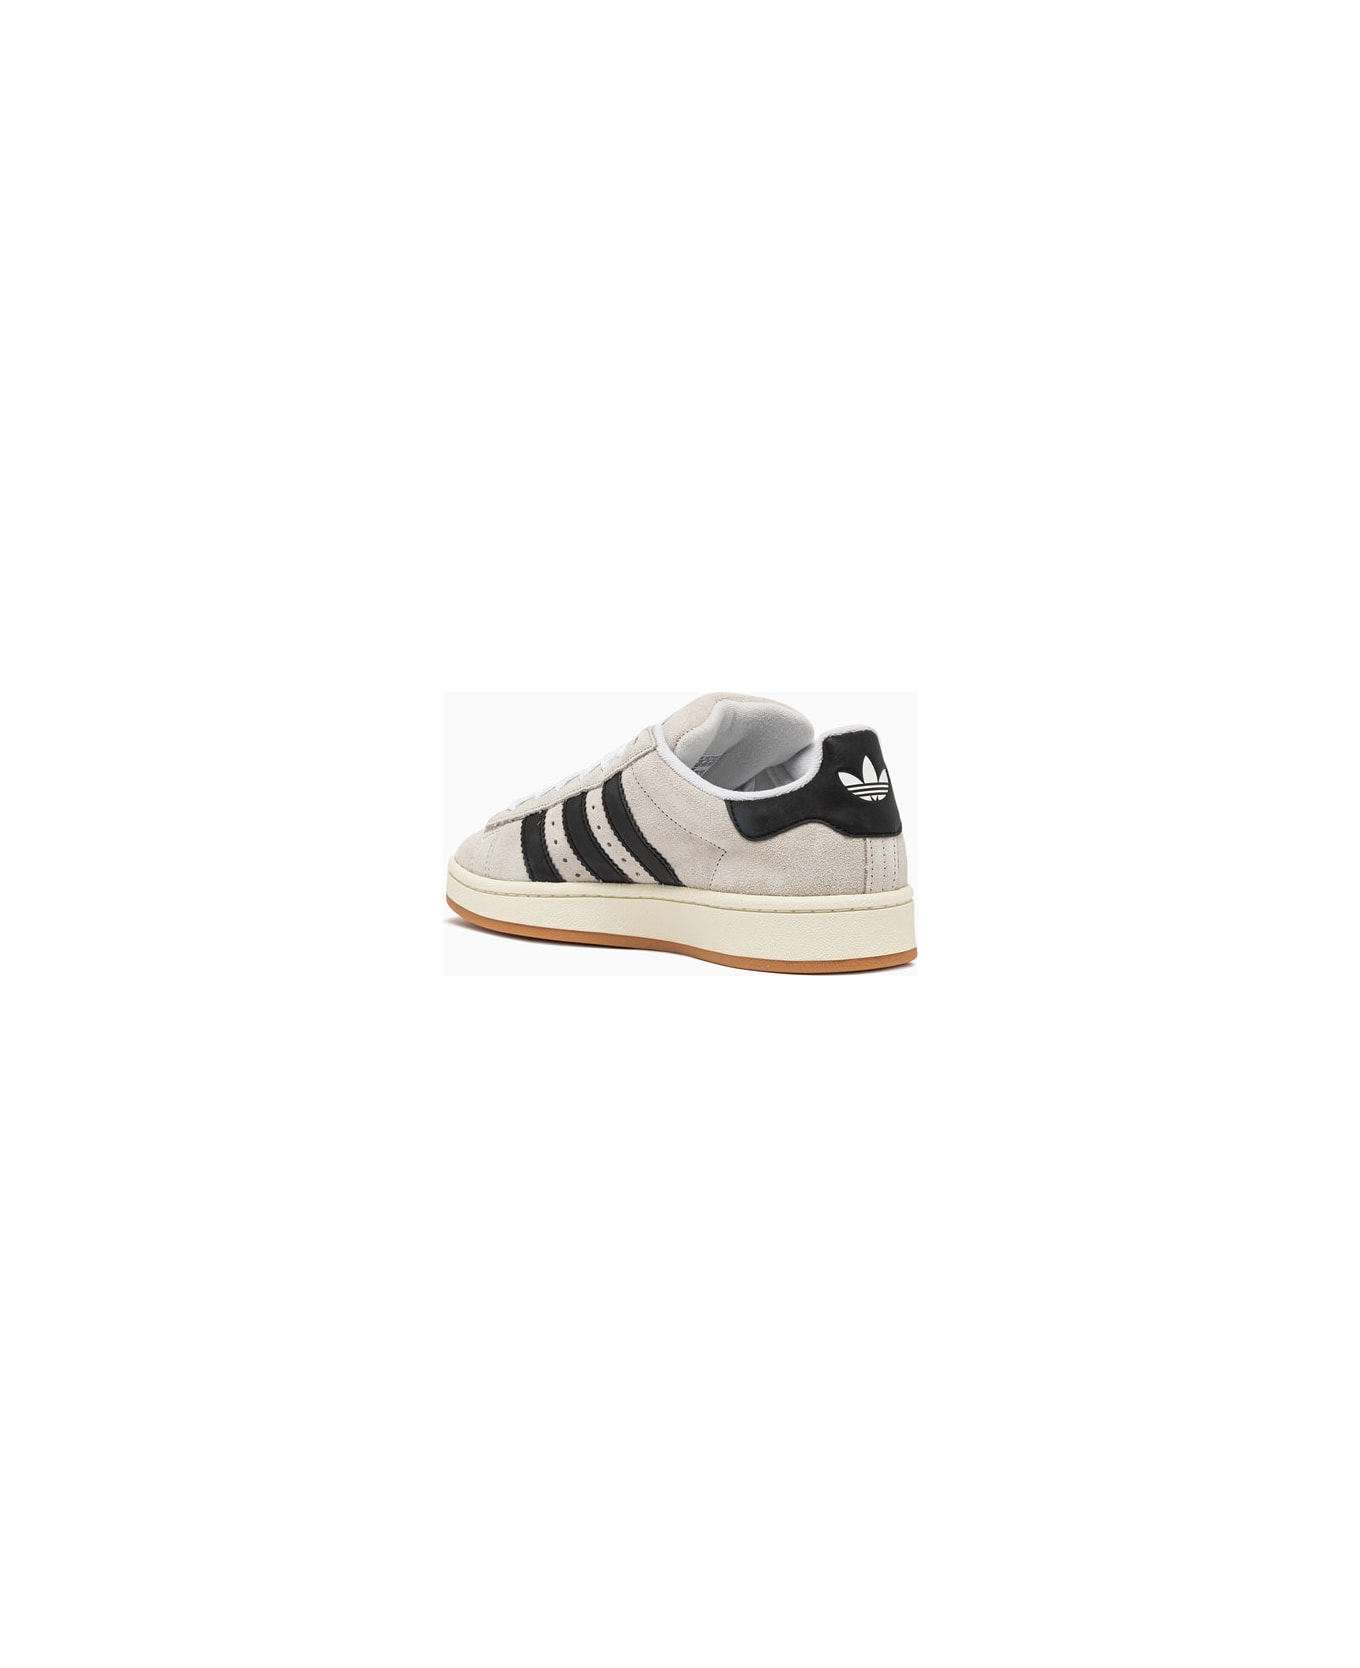 Adidas Originals Campus 00s (w) Sneakers Gy0042 - White